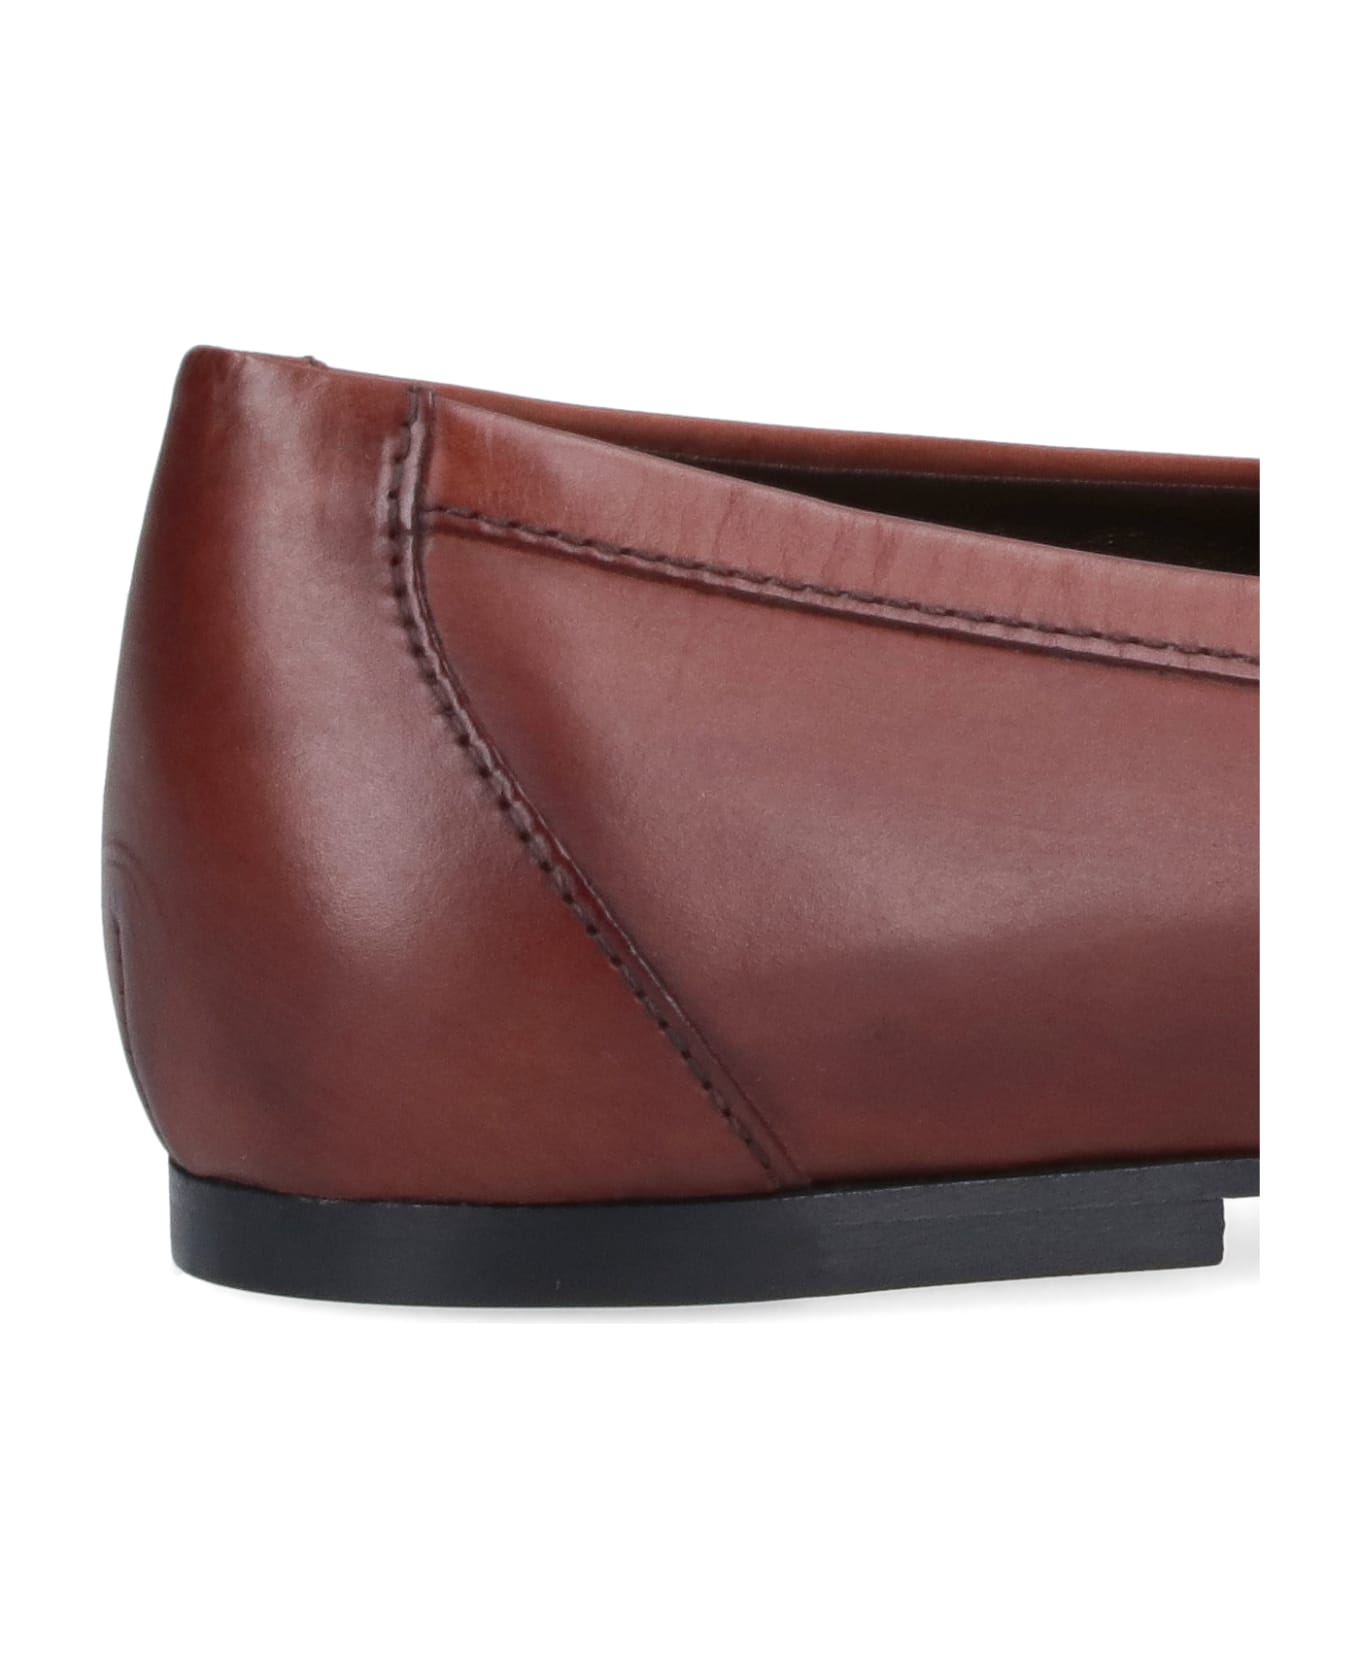 Tod's 'kate' Loafers - Brown